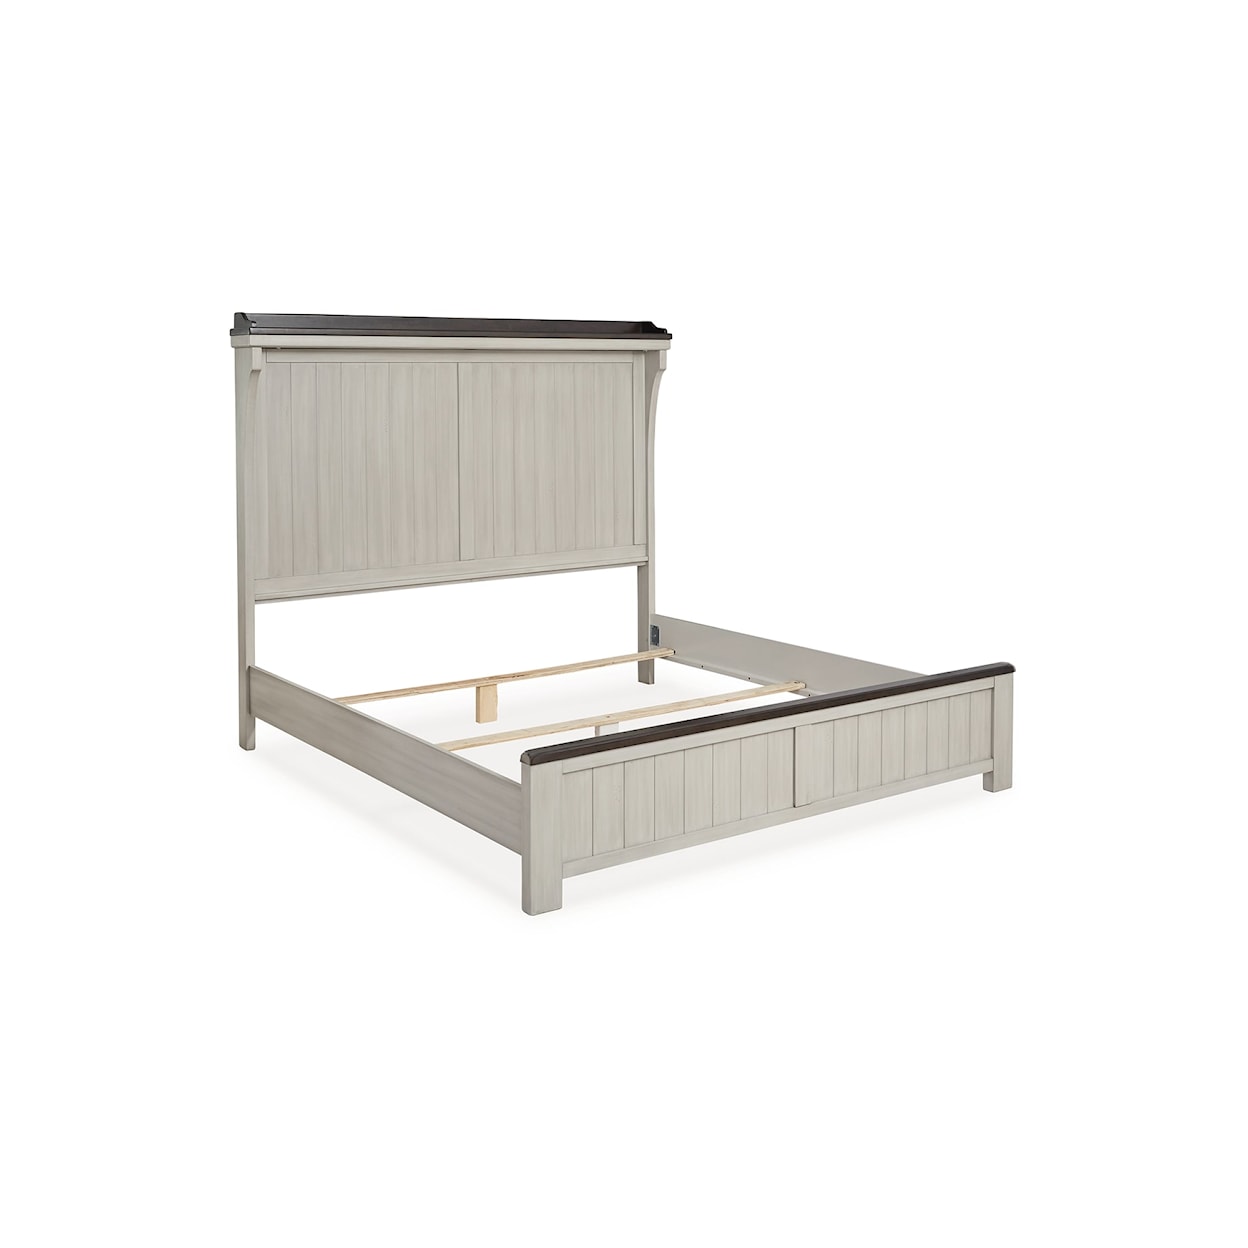 Benchcraft Darborn King Panel Bed